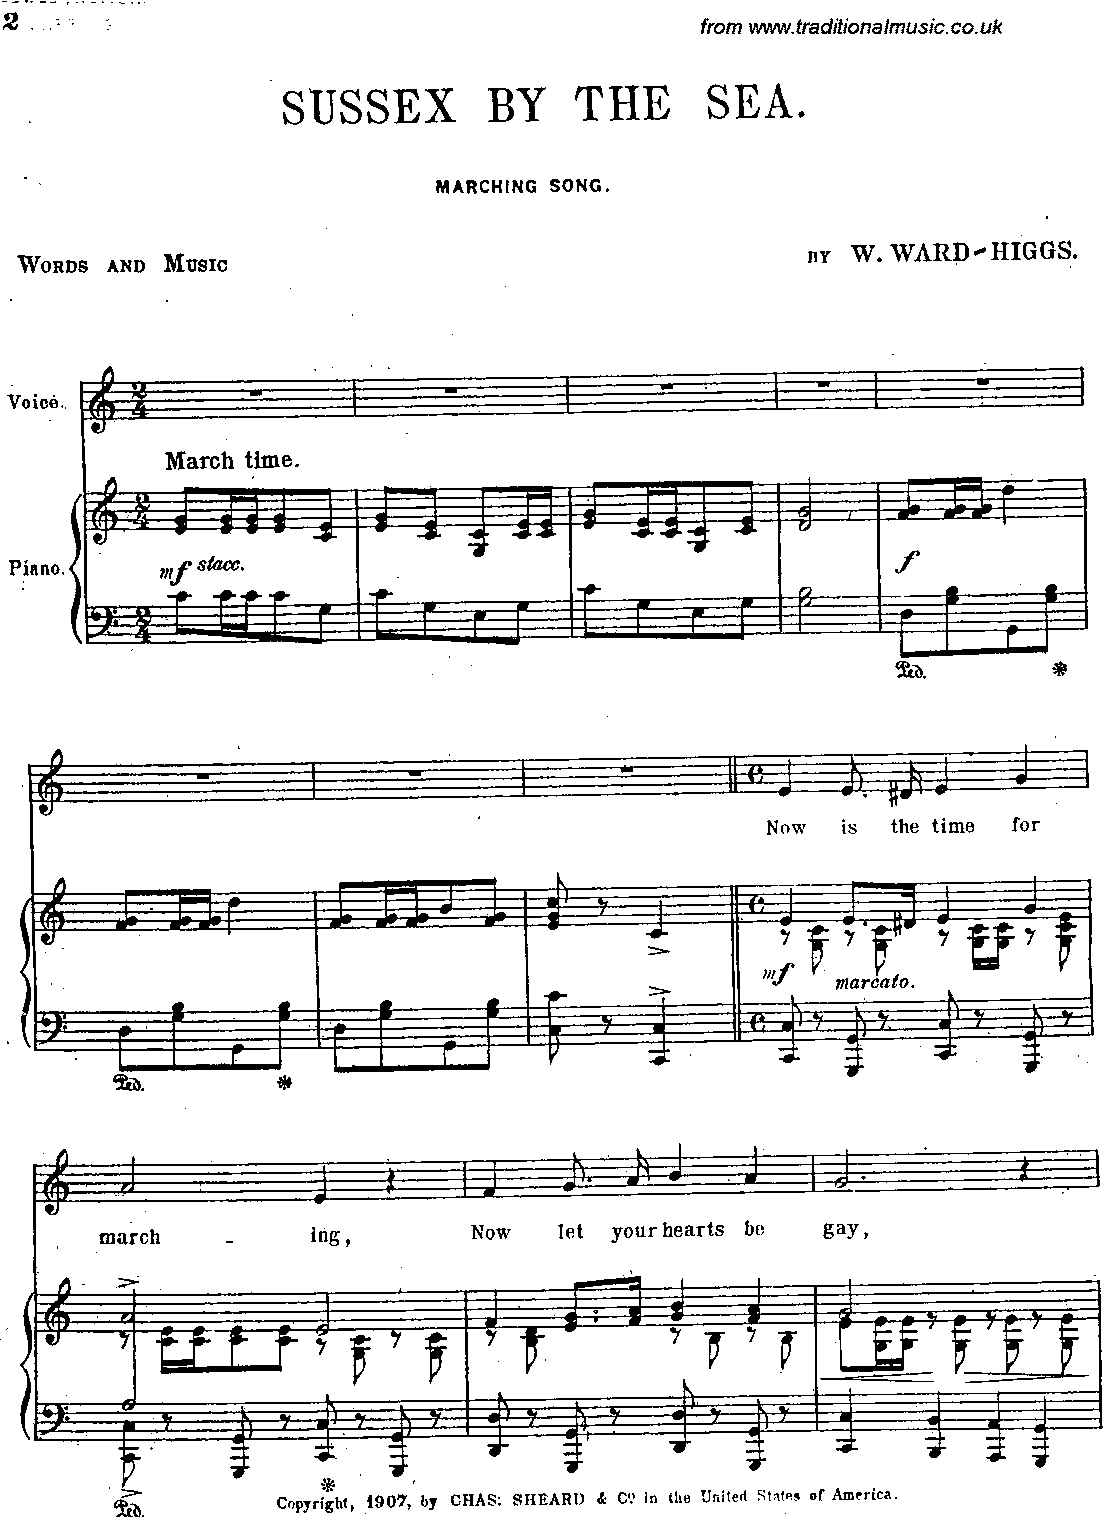 Sussex By The Sea, Complete Score, page 2 of 11